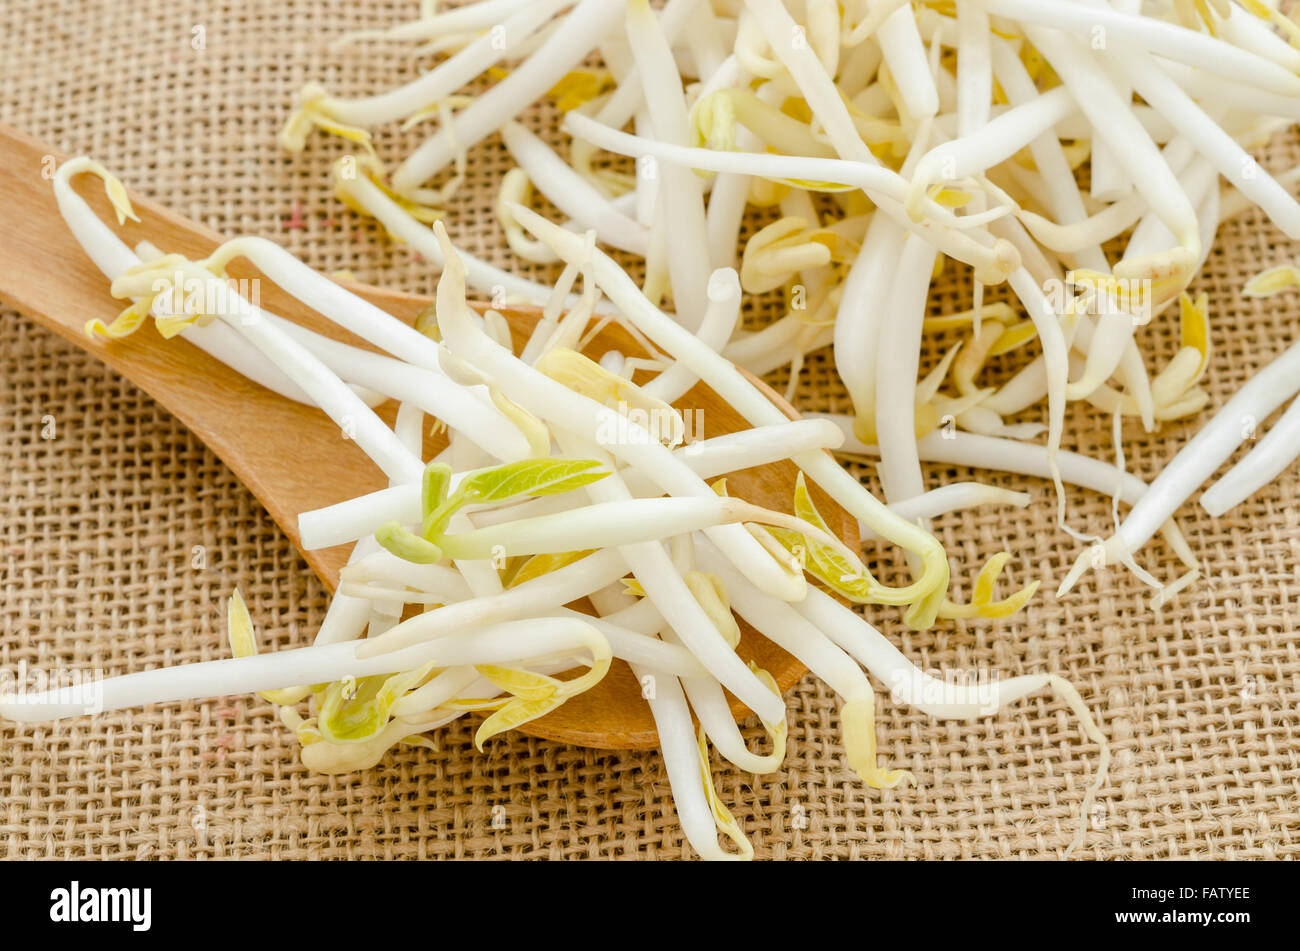 Mung beans or bean sprouts on sack background. Stock Photo